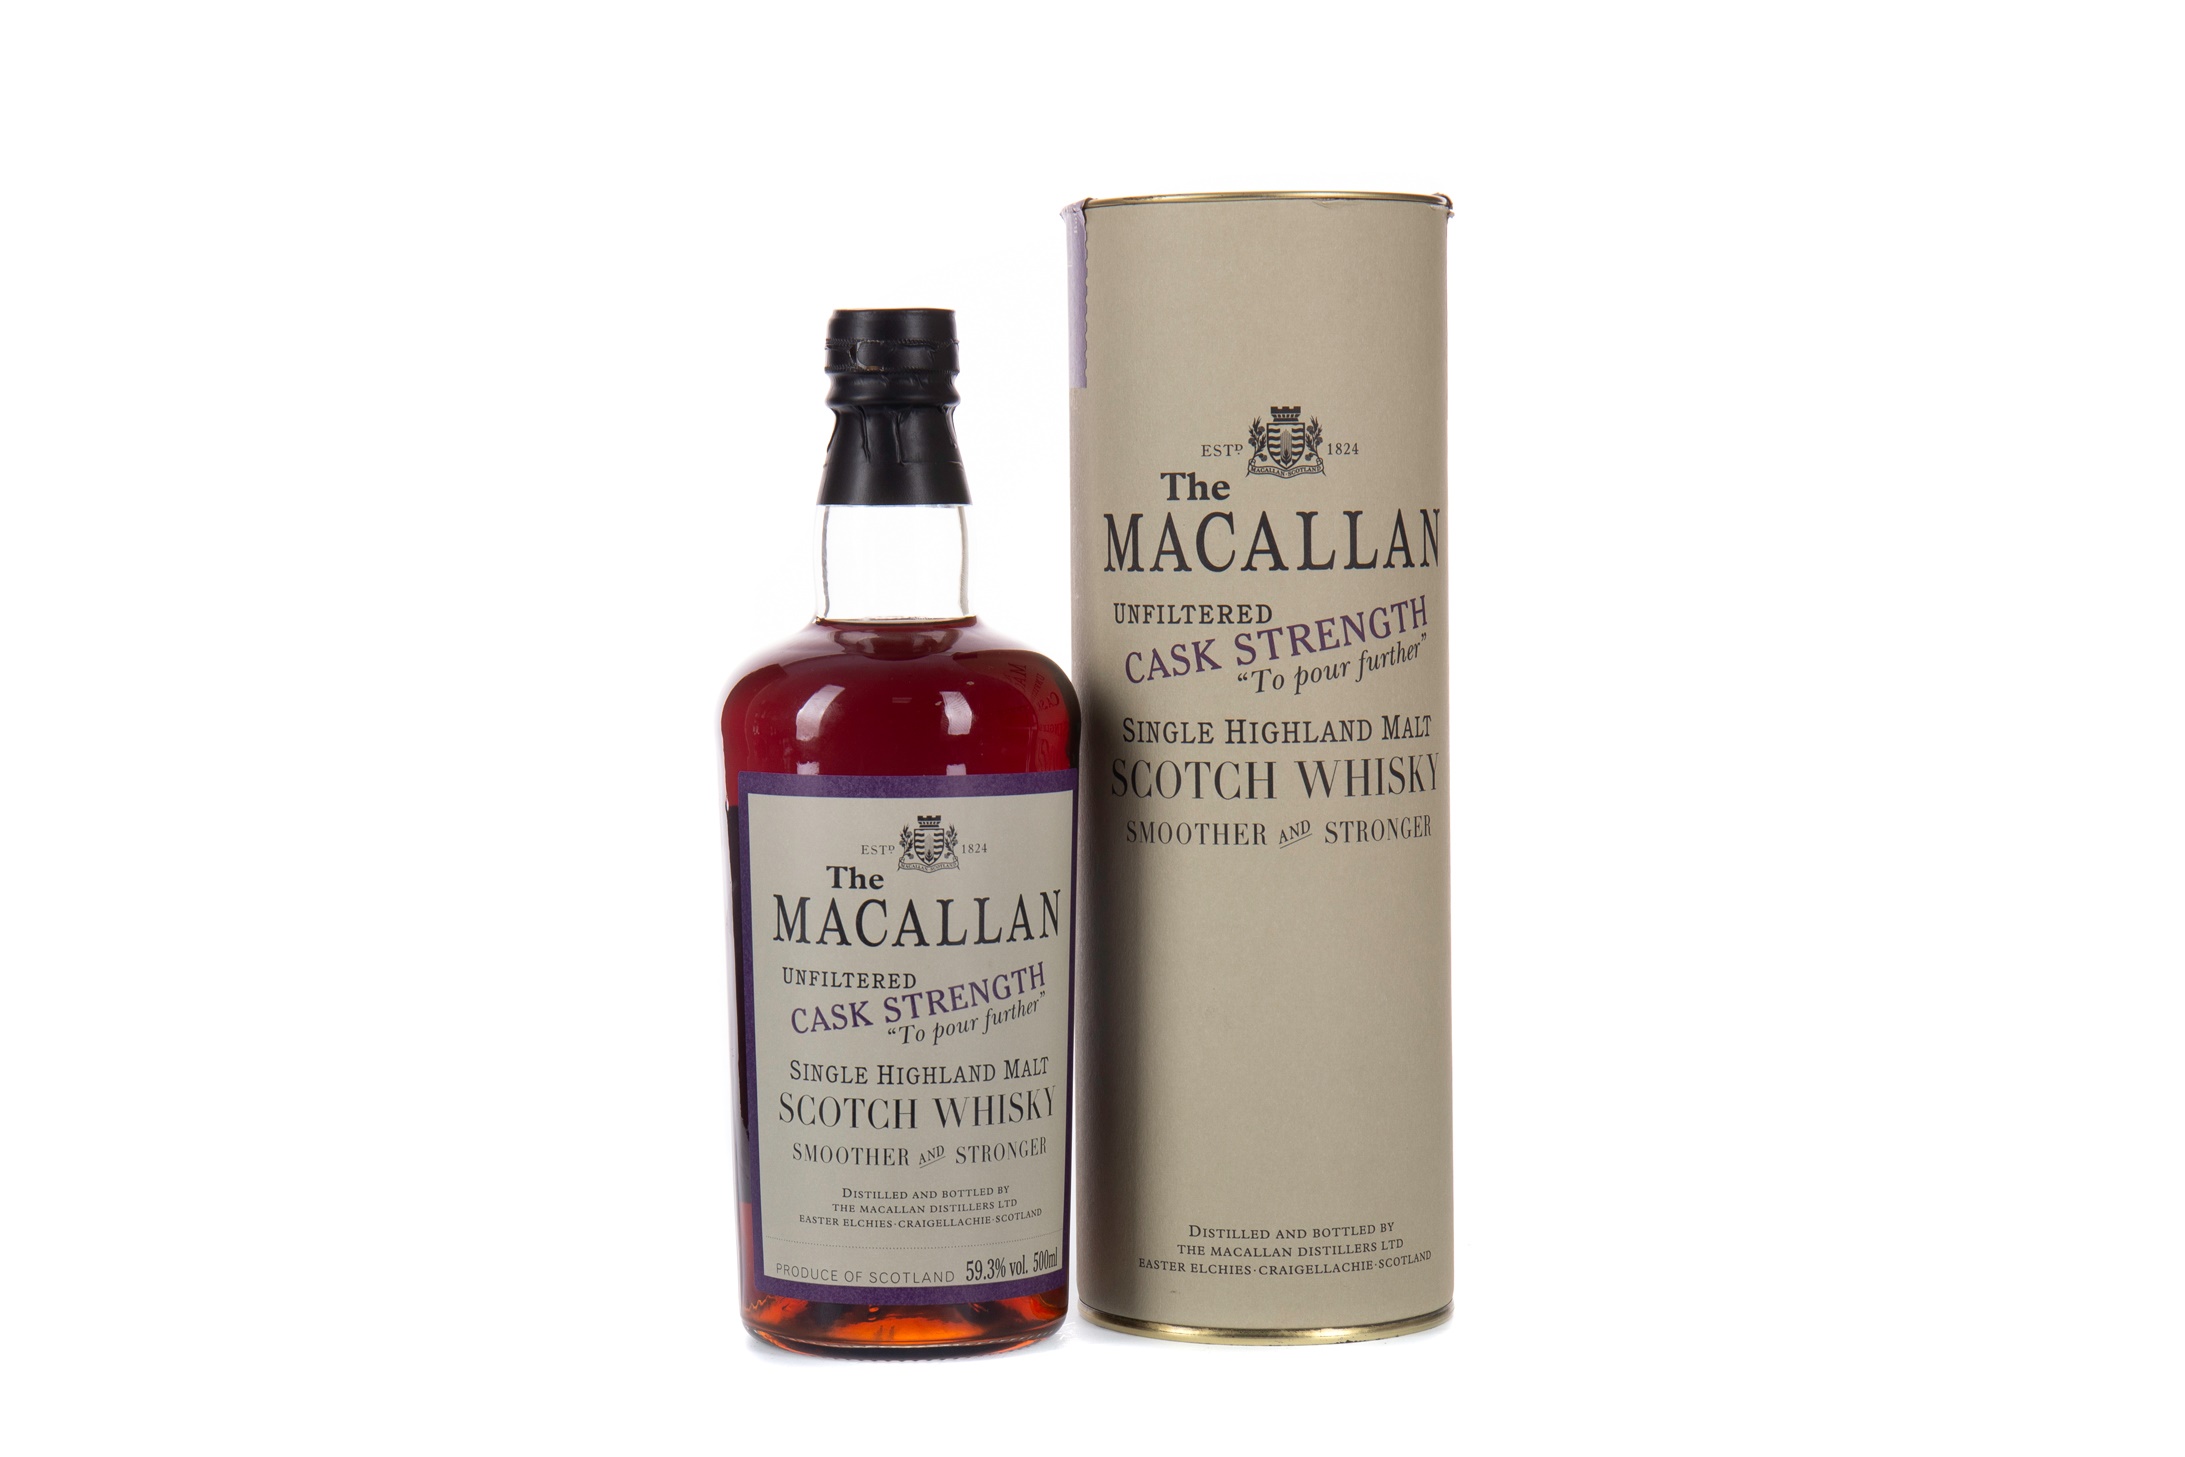  The Rare & Fine Whisky Auction